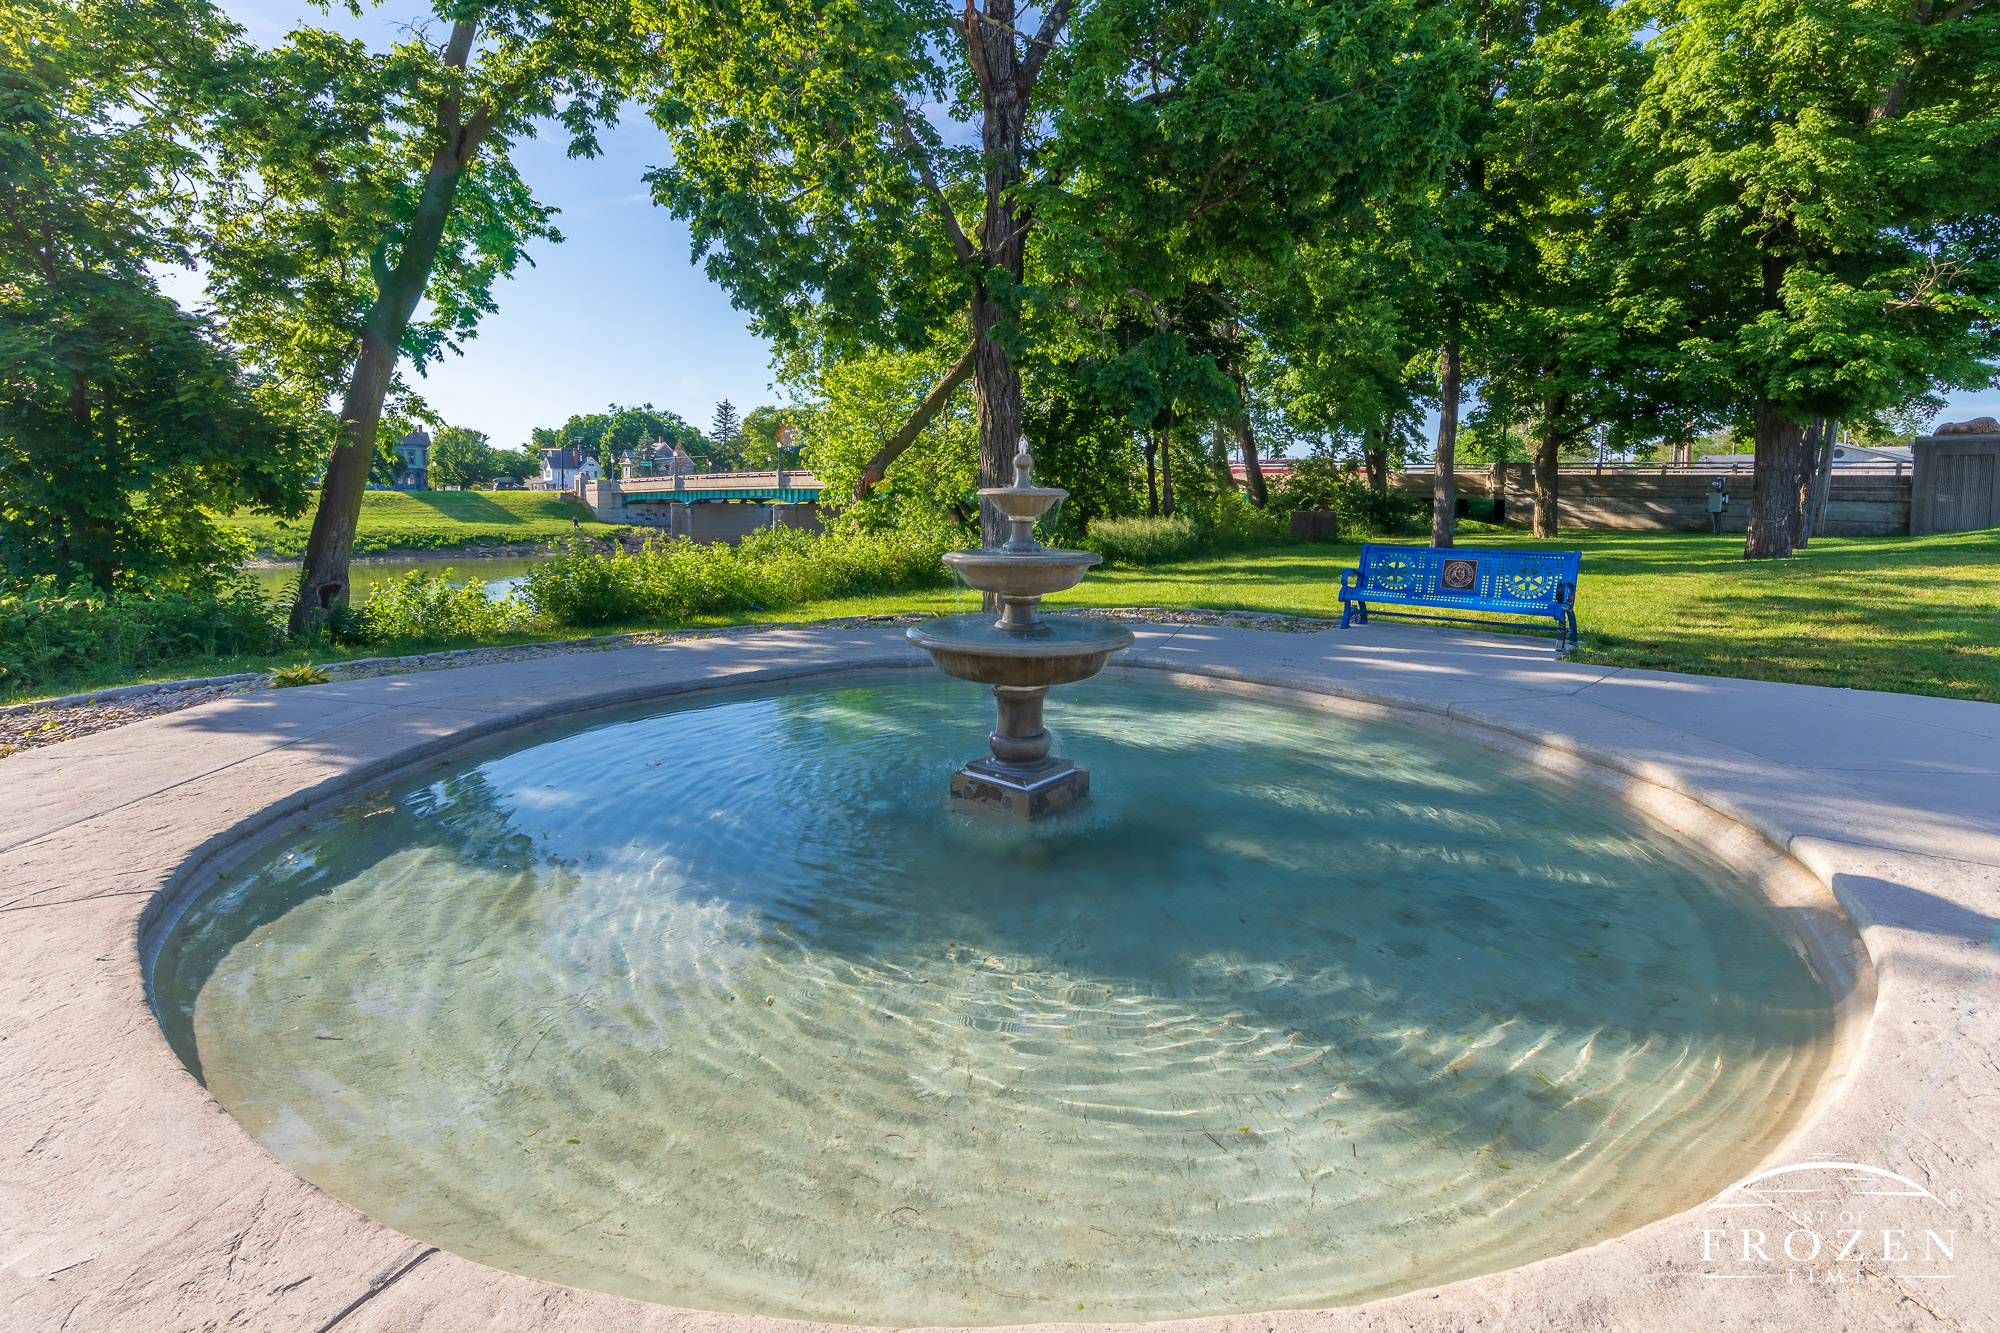 An English multi-tiered fountain standing along South River Street in Franklin, Ohio where visitors can admire the trickling water while sitting on shaded benches